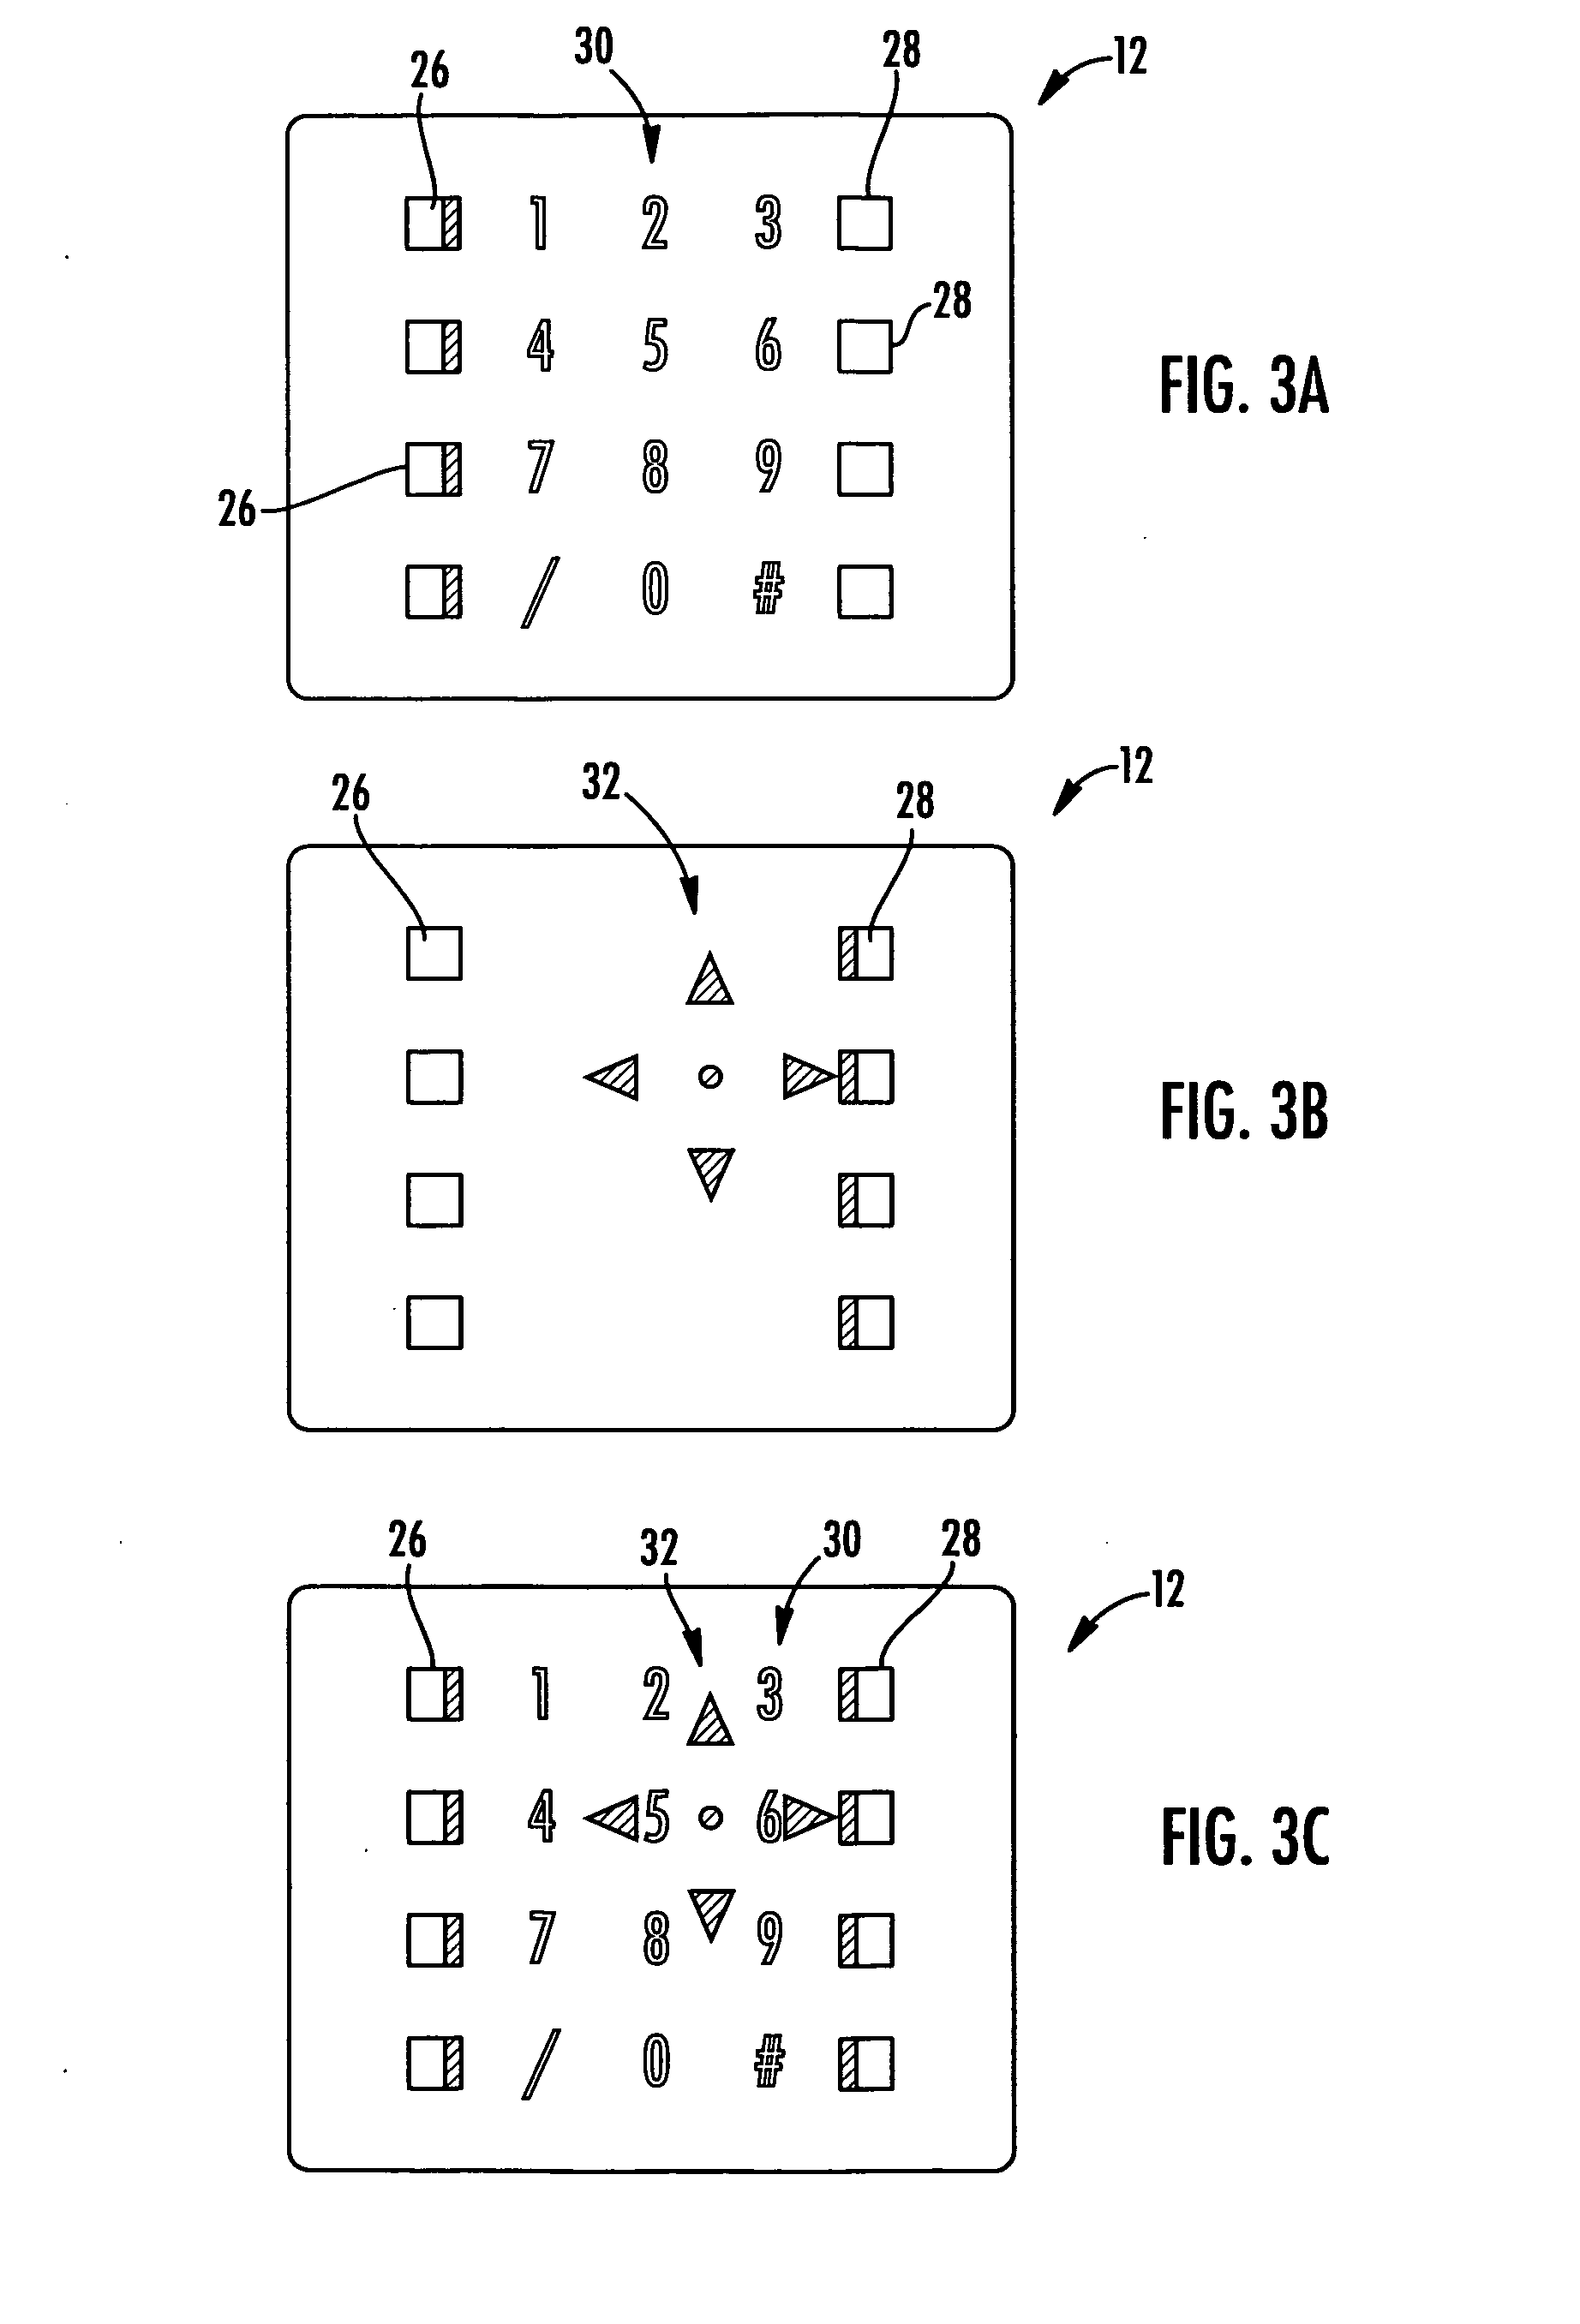 Light guide display systems and related methods, systems, and computer program products